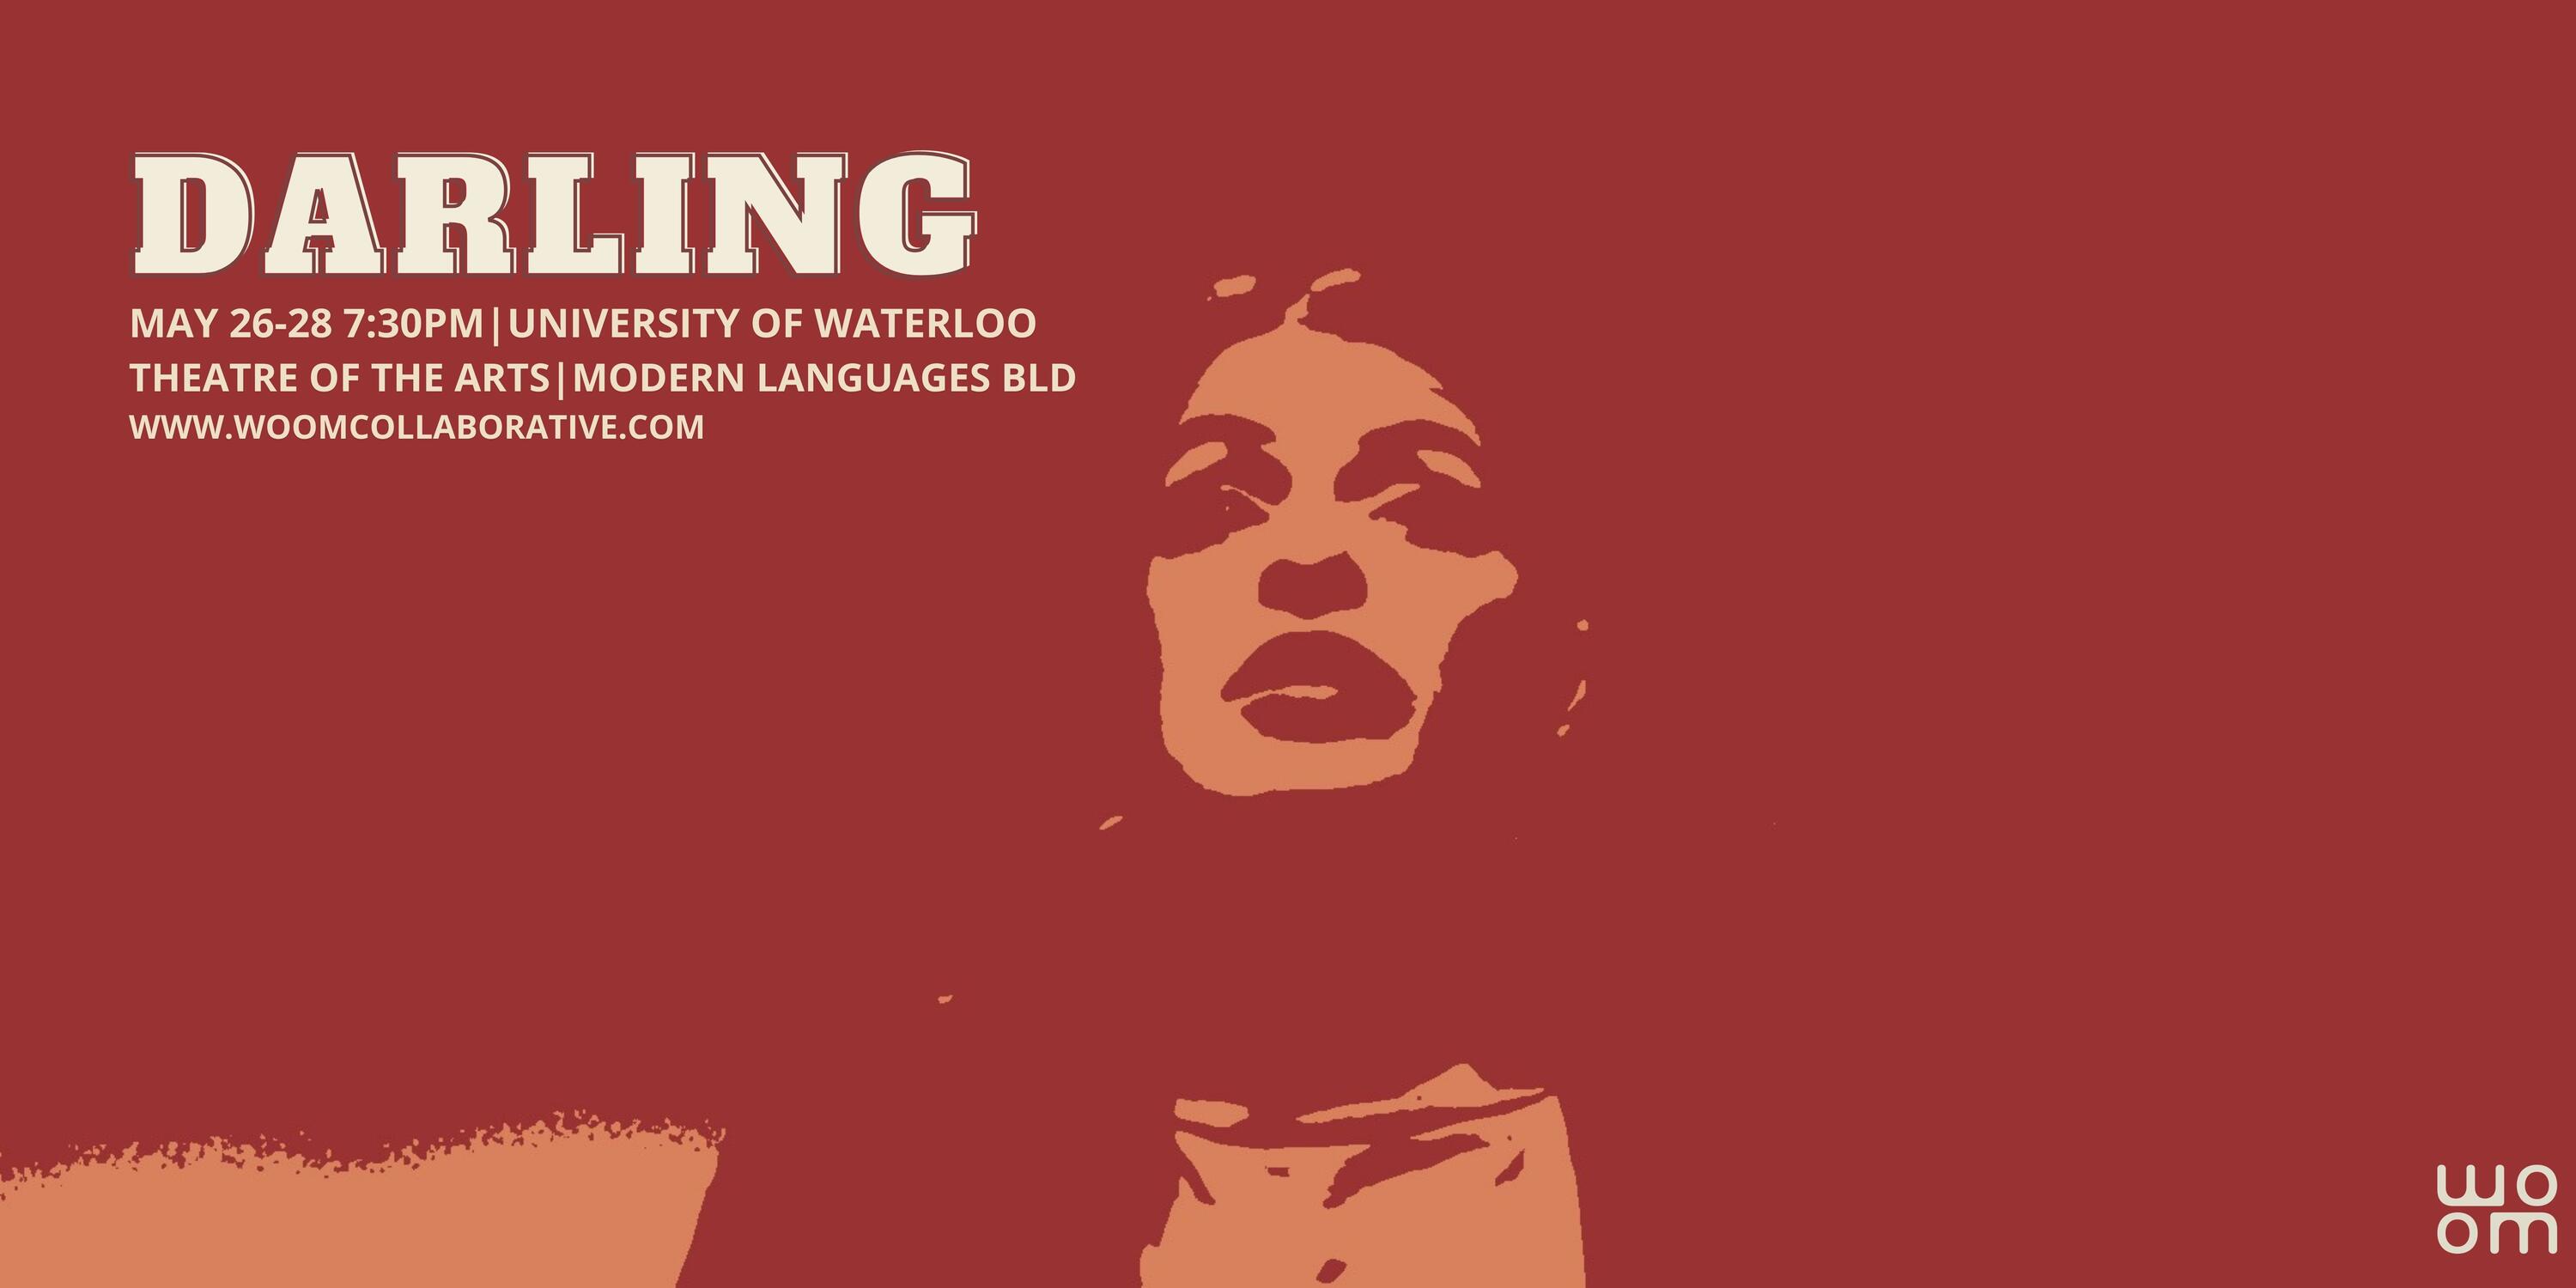 Poster for the performance of Darling.